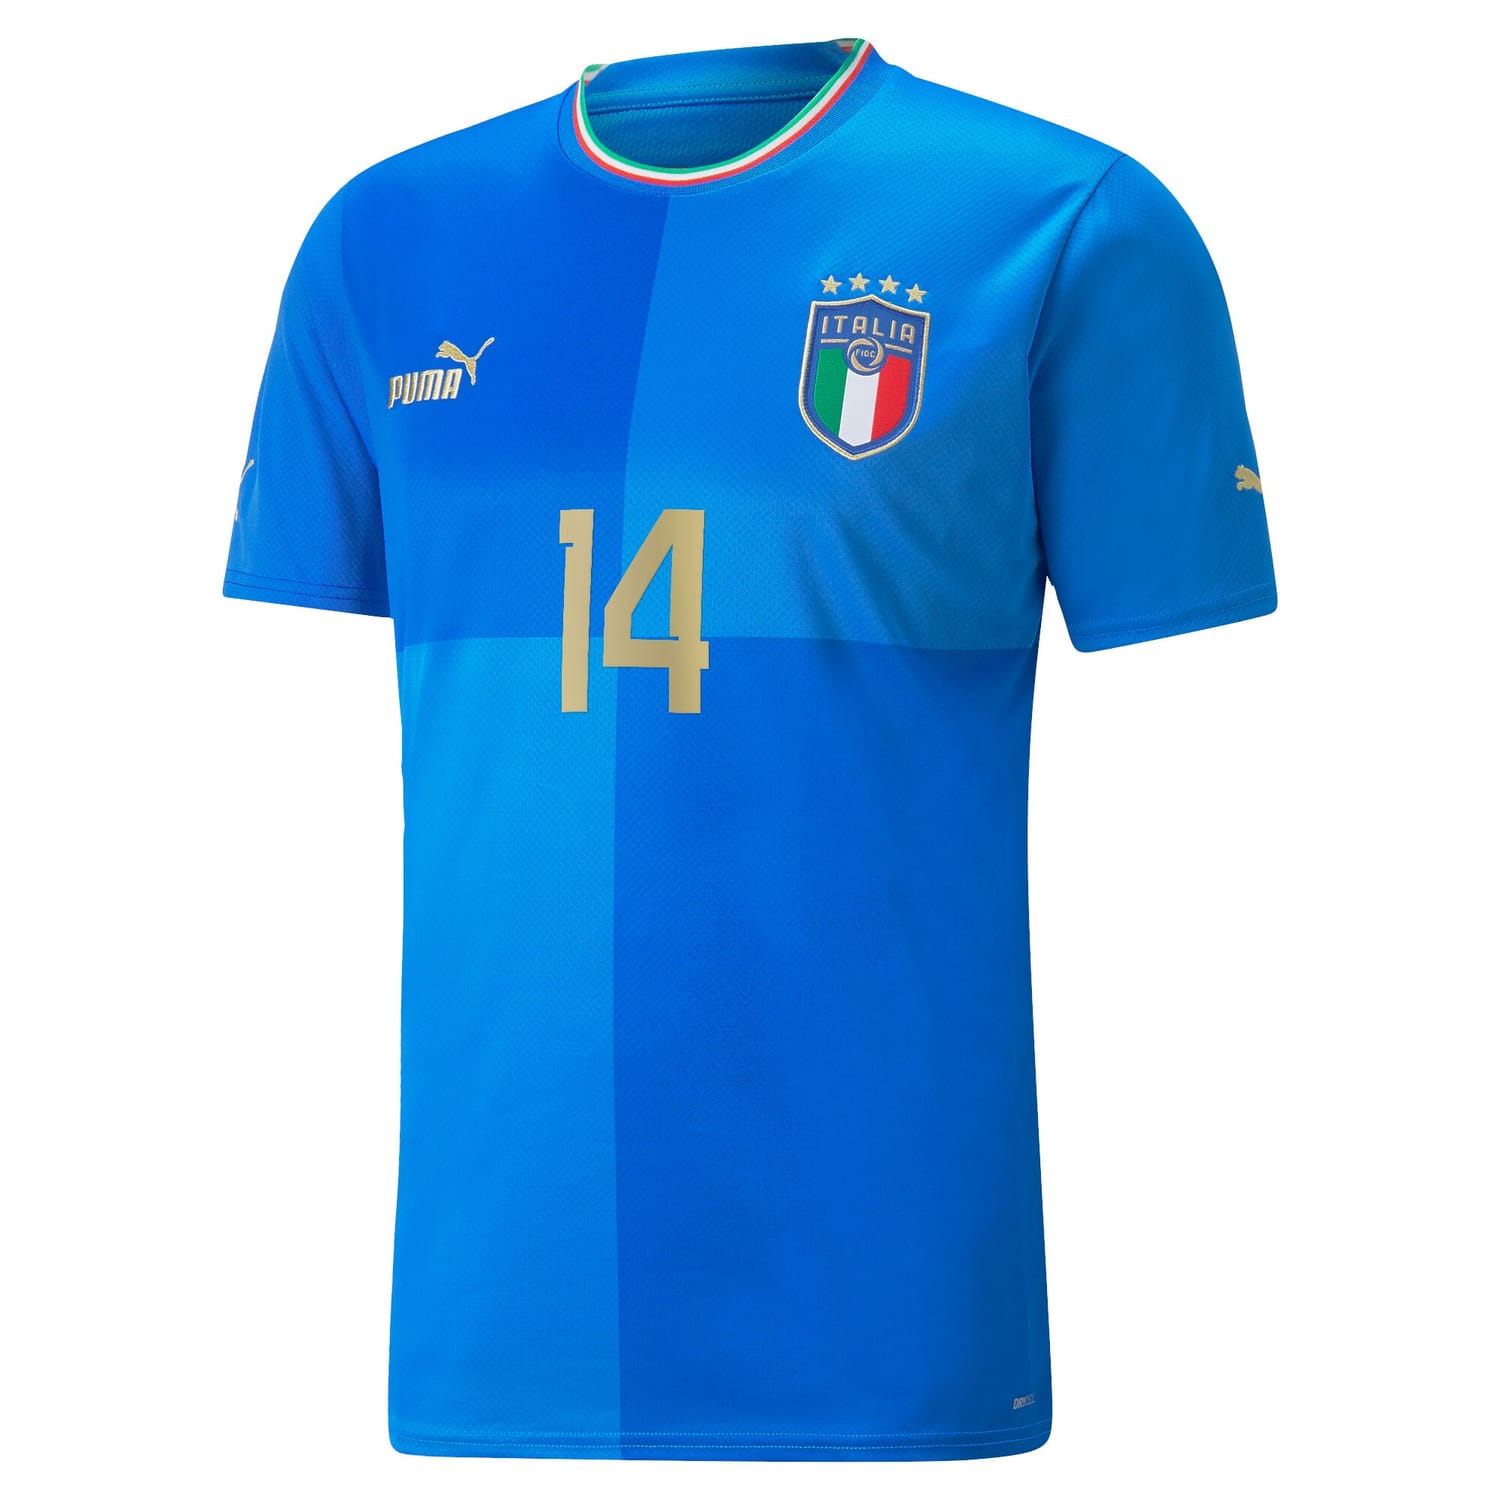 Italy National Team Home Jersey Shirt player Federico Chiesa 14 printing for Men